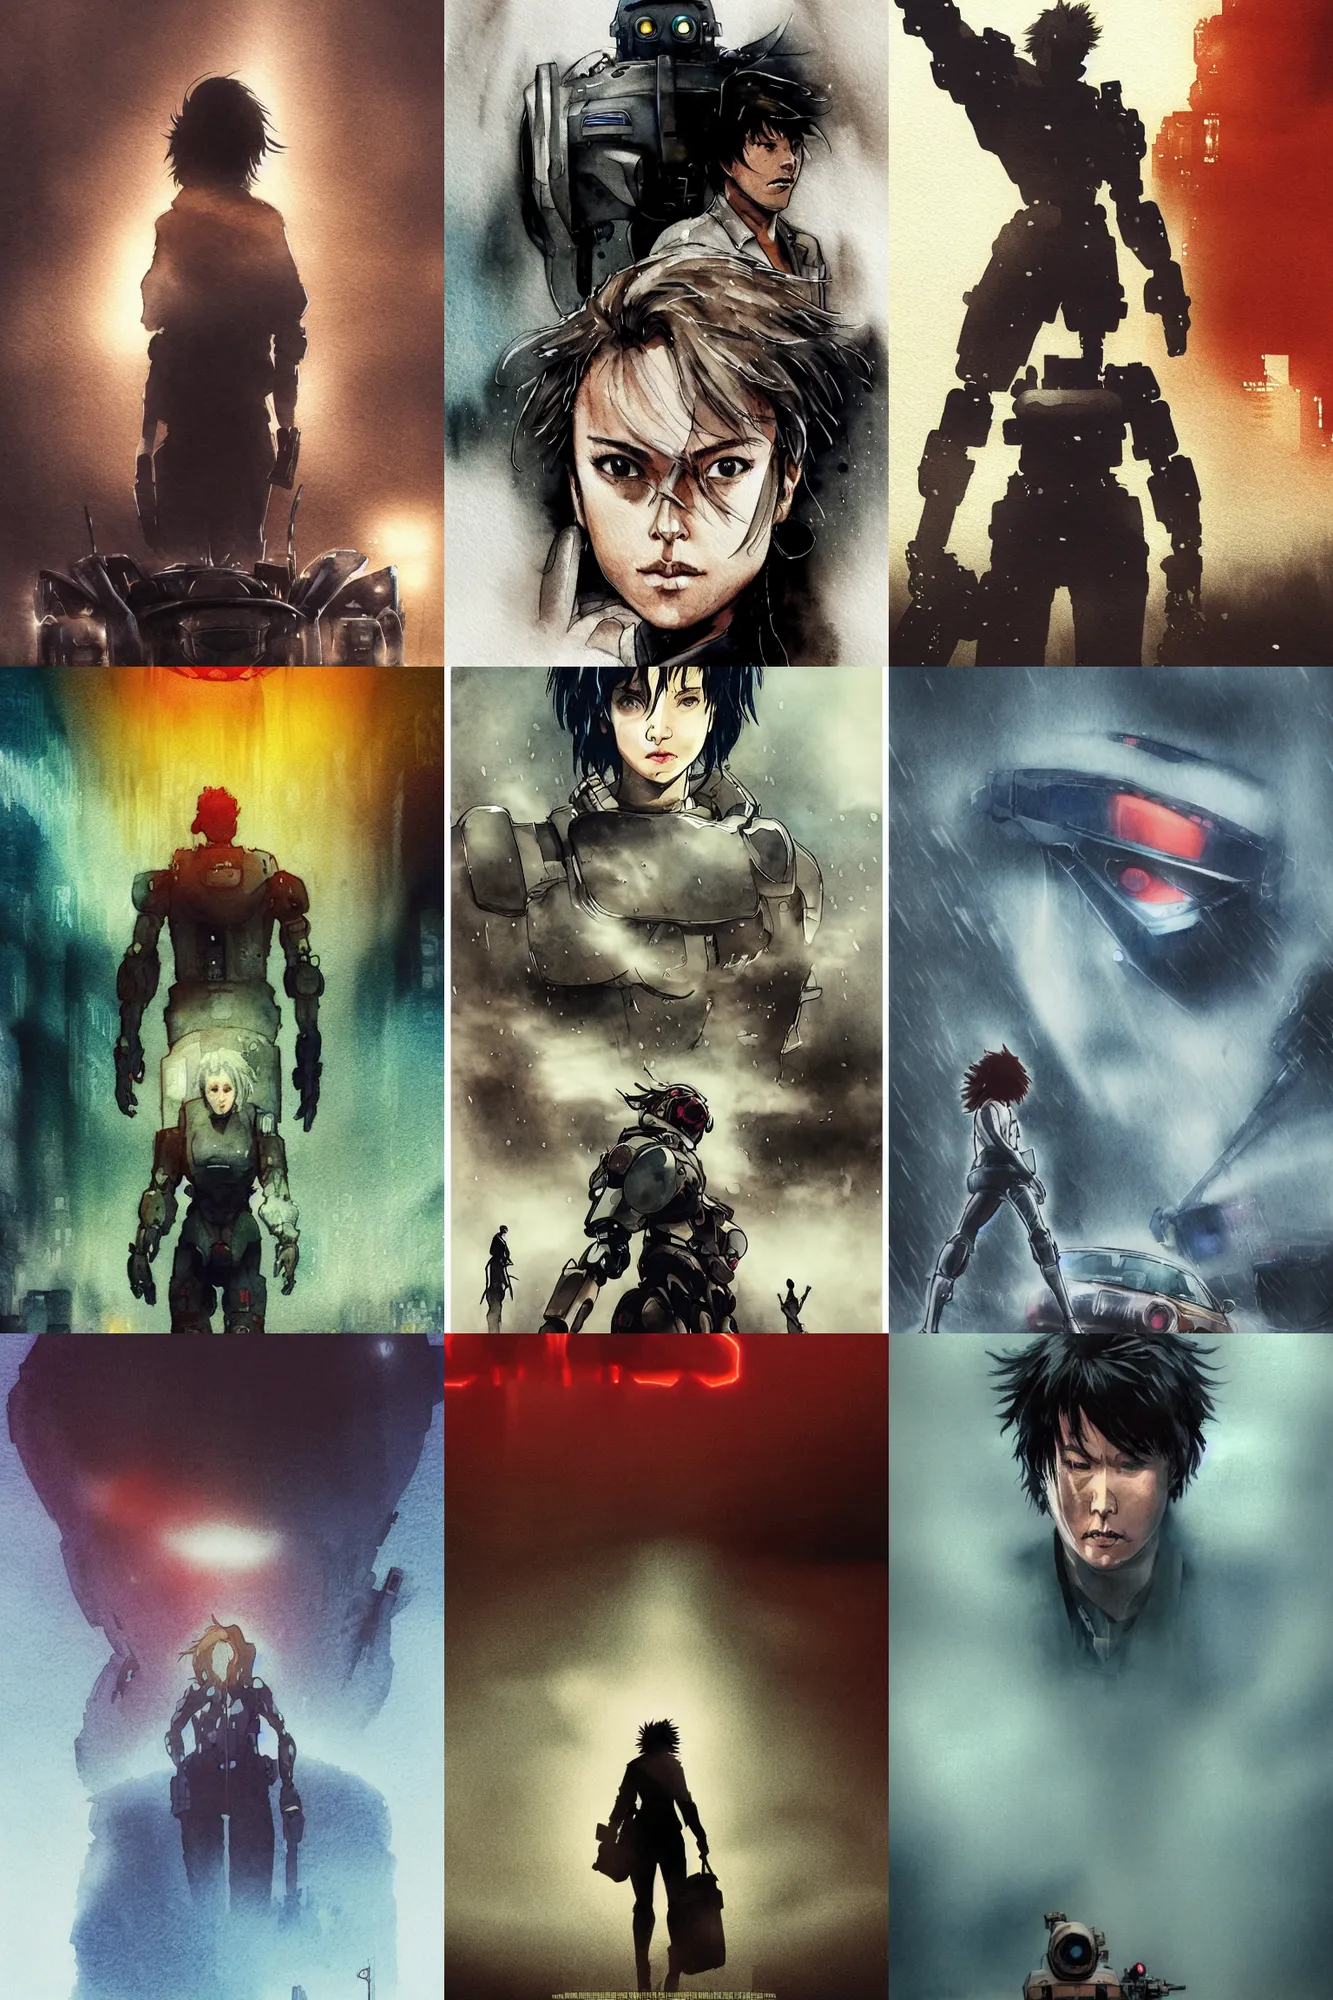 Prompt: incredible movie poster, simple watercolor, fish eye lens, curvilinear perspective, yoji shinkawa, kastuhiro otomo, giant robot in the fog,foggy heavy rain, downpour, movie scene close up emotional miss Kusanagi face, short bob hair, foggy lights, brown mud, dust, giant whale tank with legs, robot arm, emotional face shot ,light rain, glowing atari sign, japanese advertisements on buildings, hd, 4k, remaster, dynamic camera angle, deep 3 point perspective, fish eye, dynamic scene